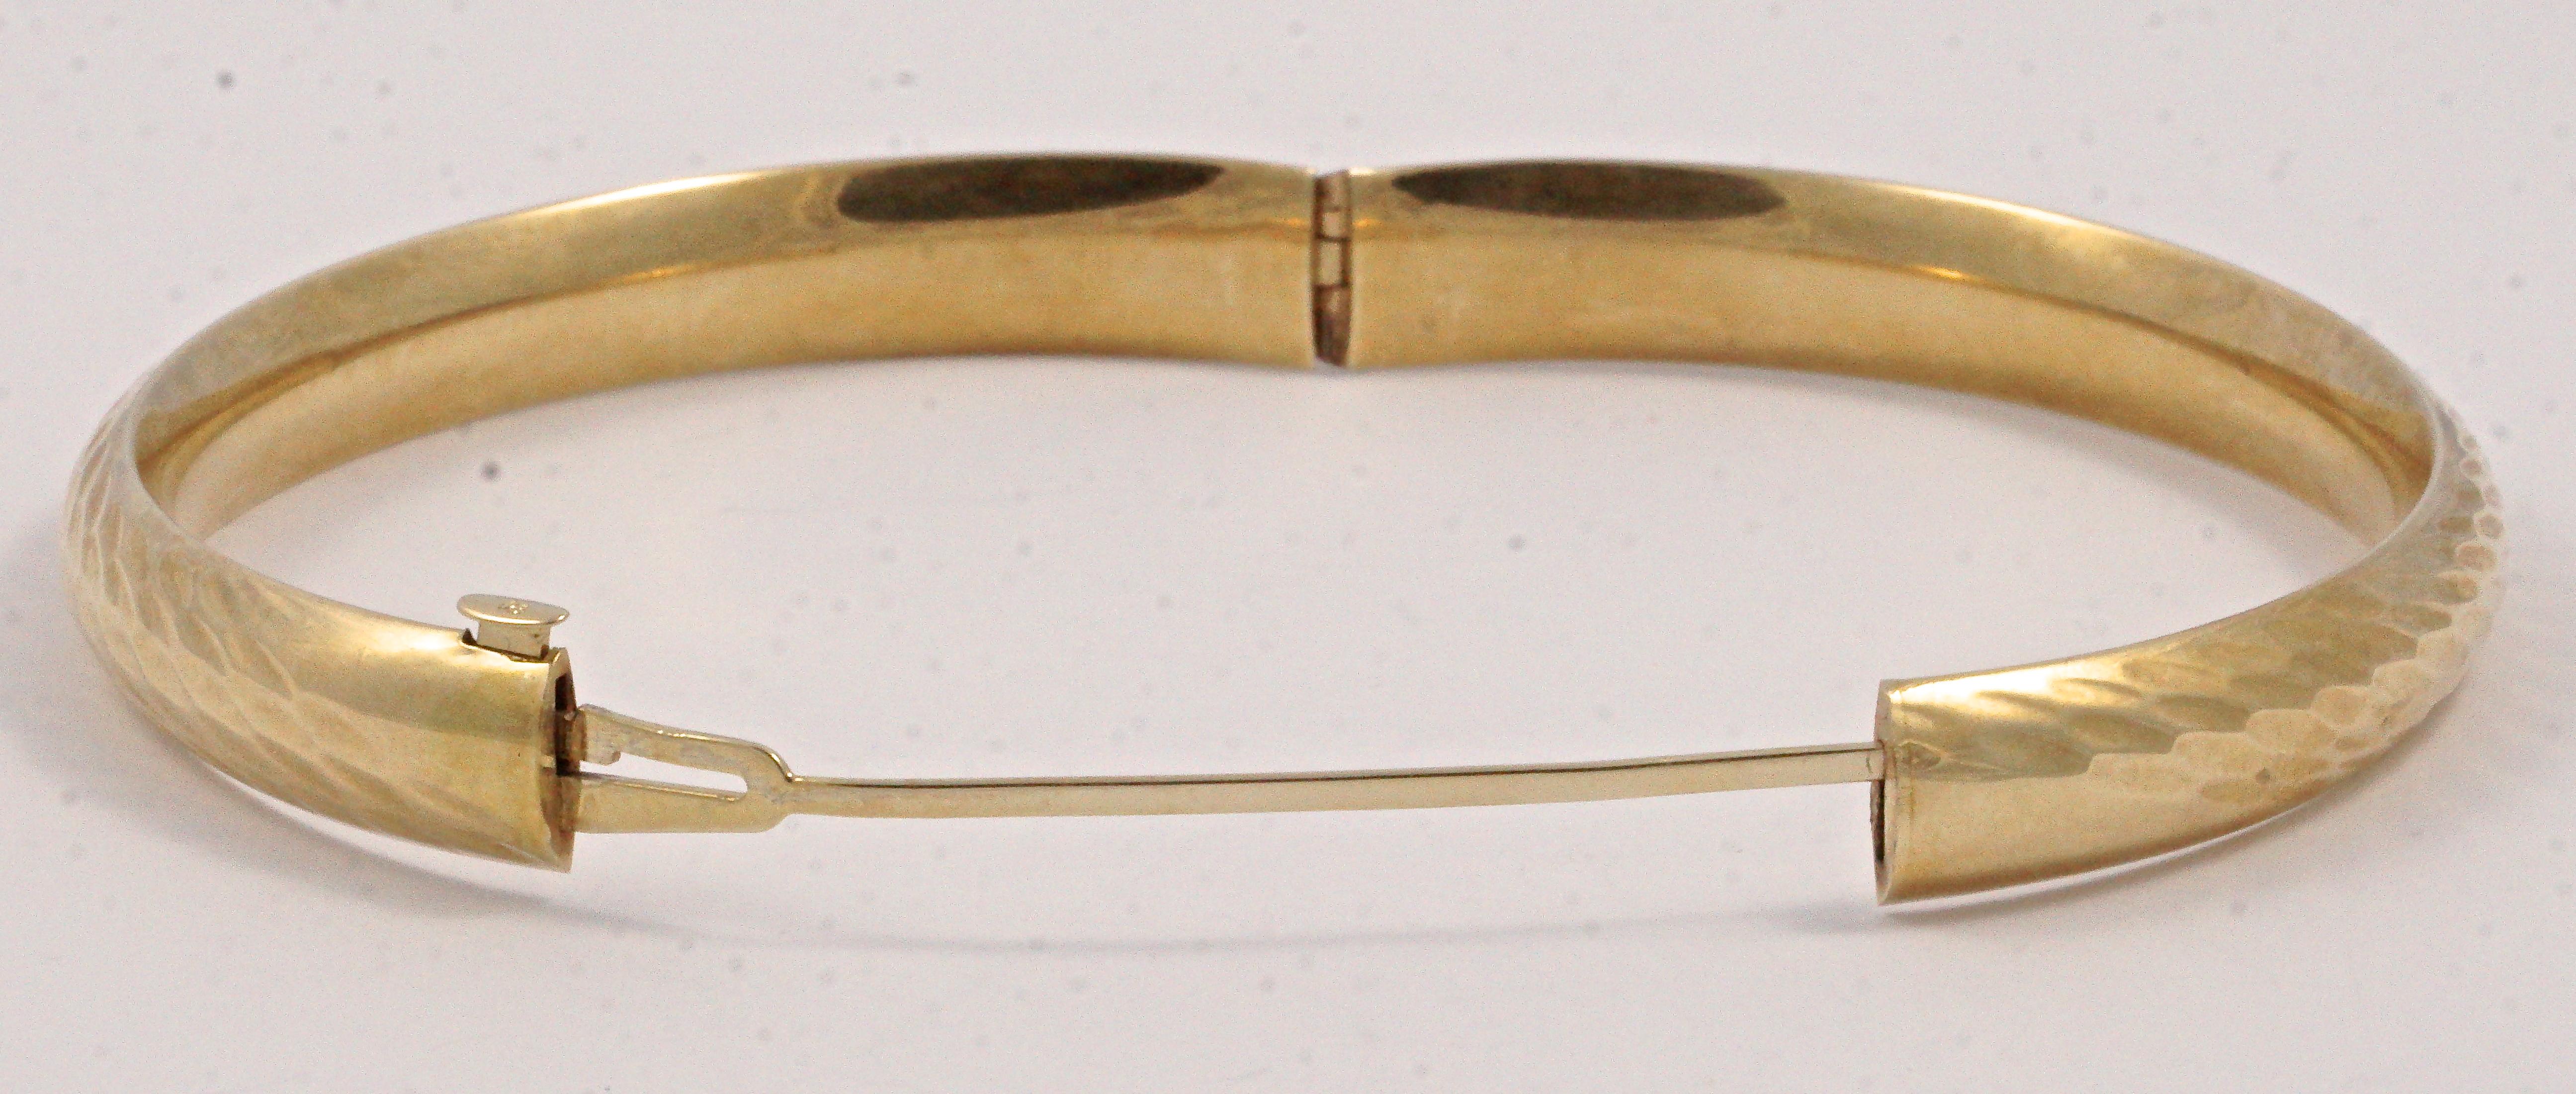 EternaGold 14K gold Costa Rica bangle, featuring a ripple design. The bangle is hollow and light to wear, and is slightly oval measuring 6.5cm / 2.56 inches by 6cm / 2.36 inches diameter, the width is 8mm. / .31 inch. It opens with a push button and